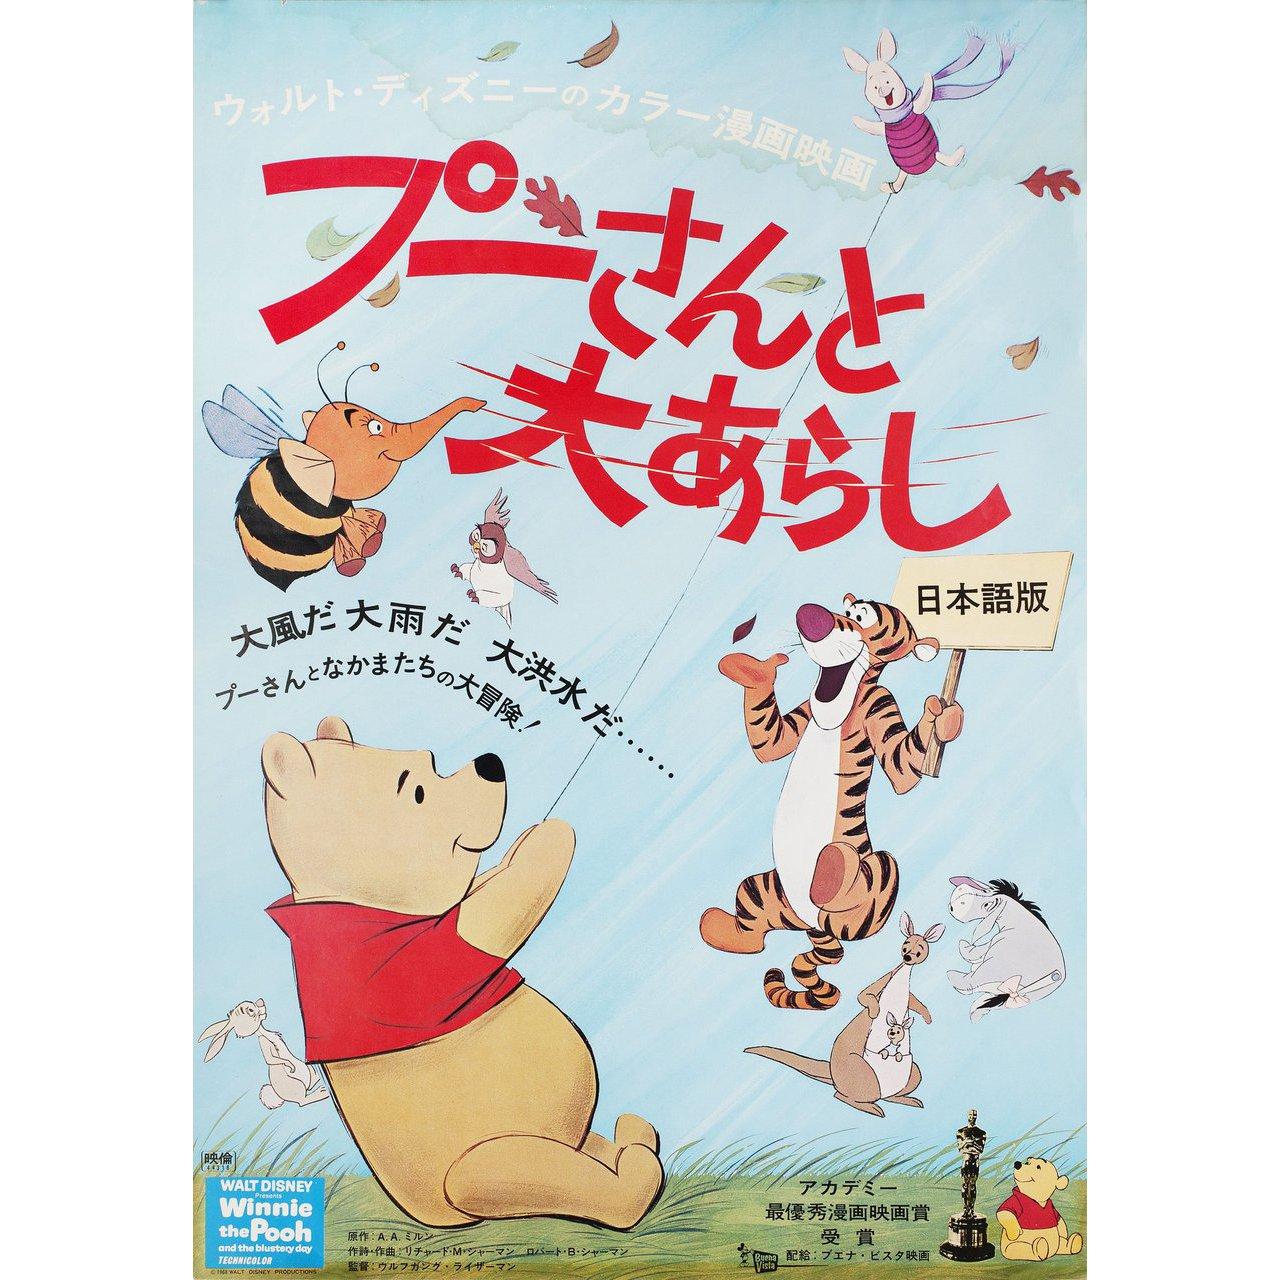 Winnie the Pooh and the Blustery Day 1970 Japanese B2 Film Poster